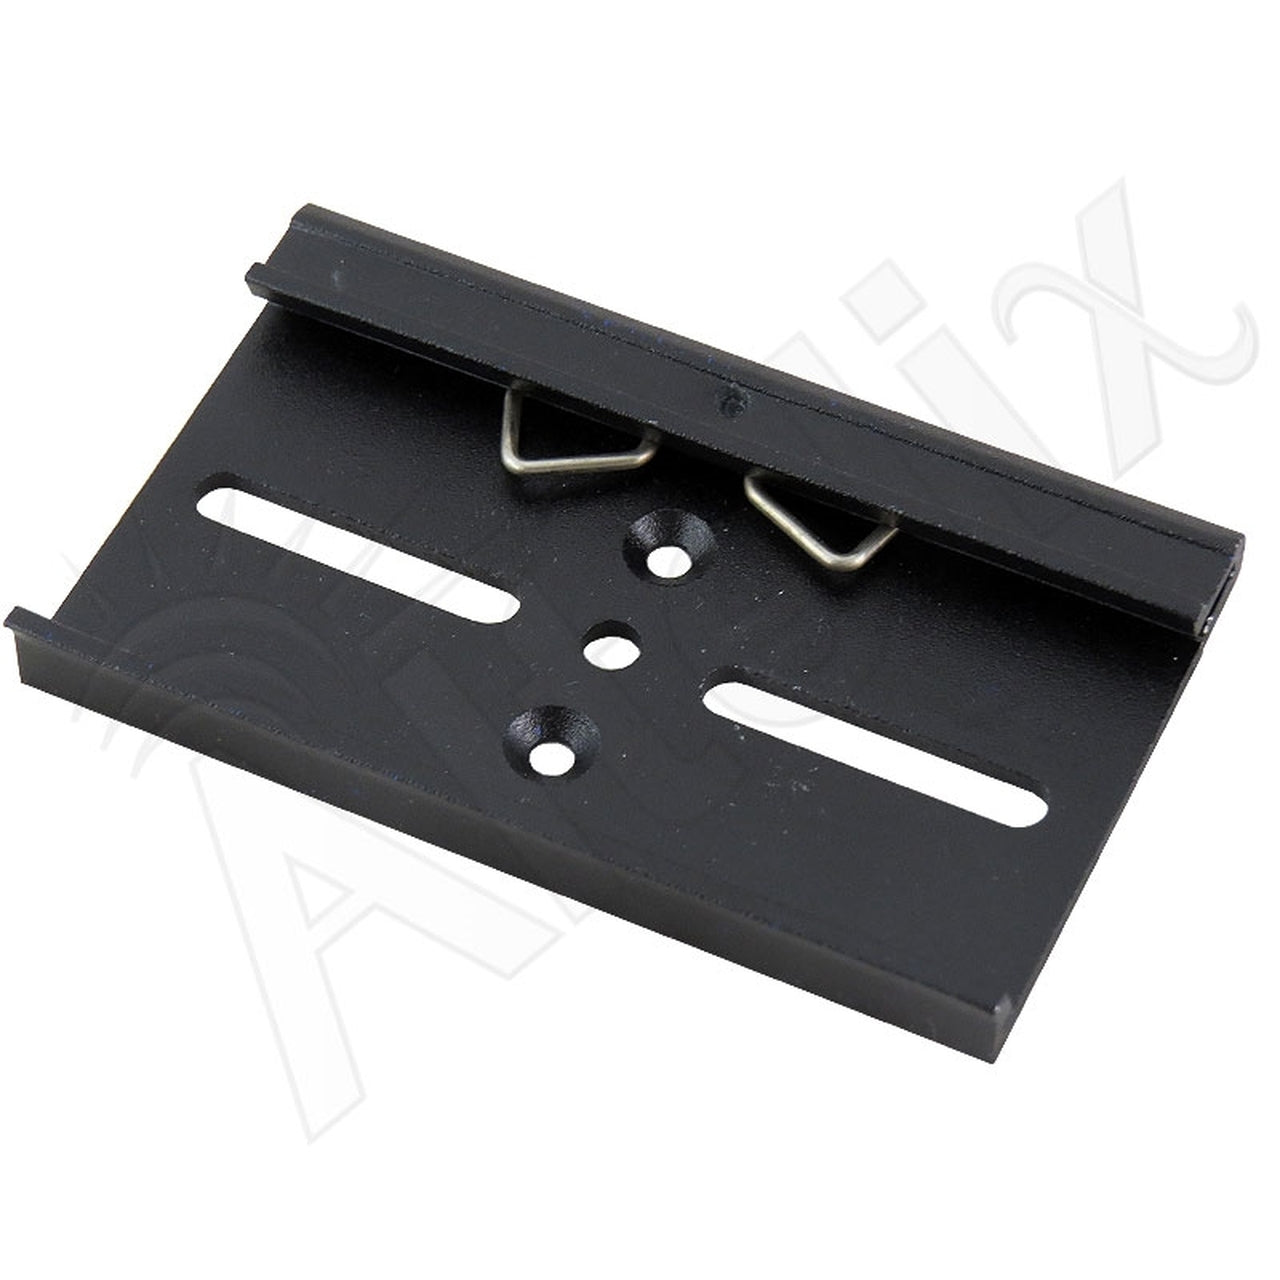 80mm Wide Aluminum DIN Rail Mounting Clip for 35mm Top Hat Rail